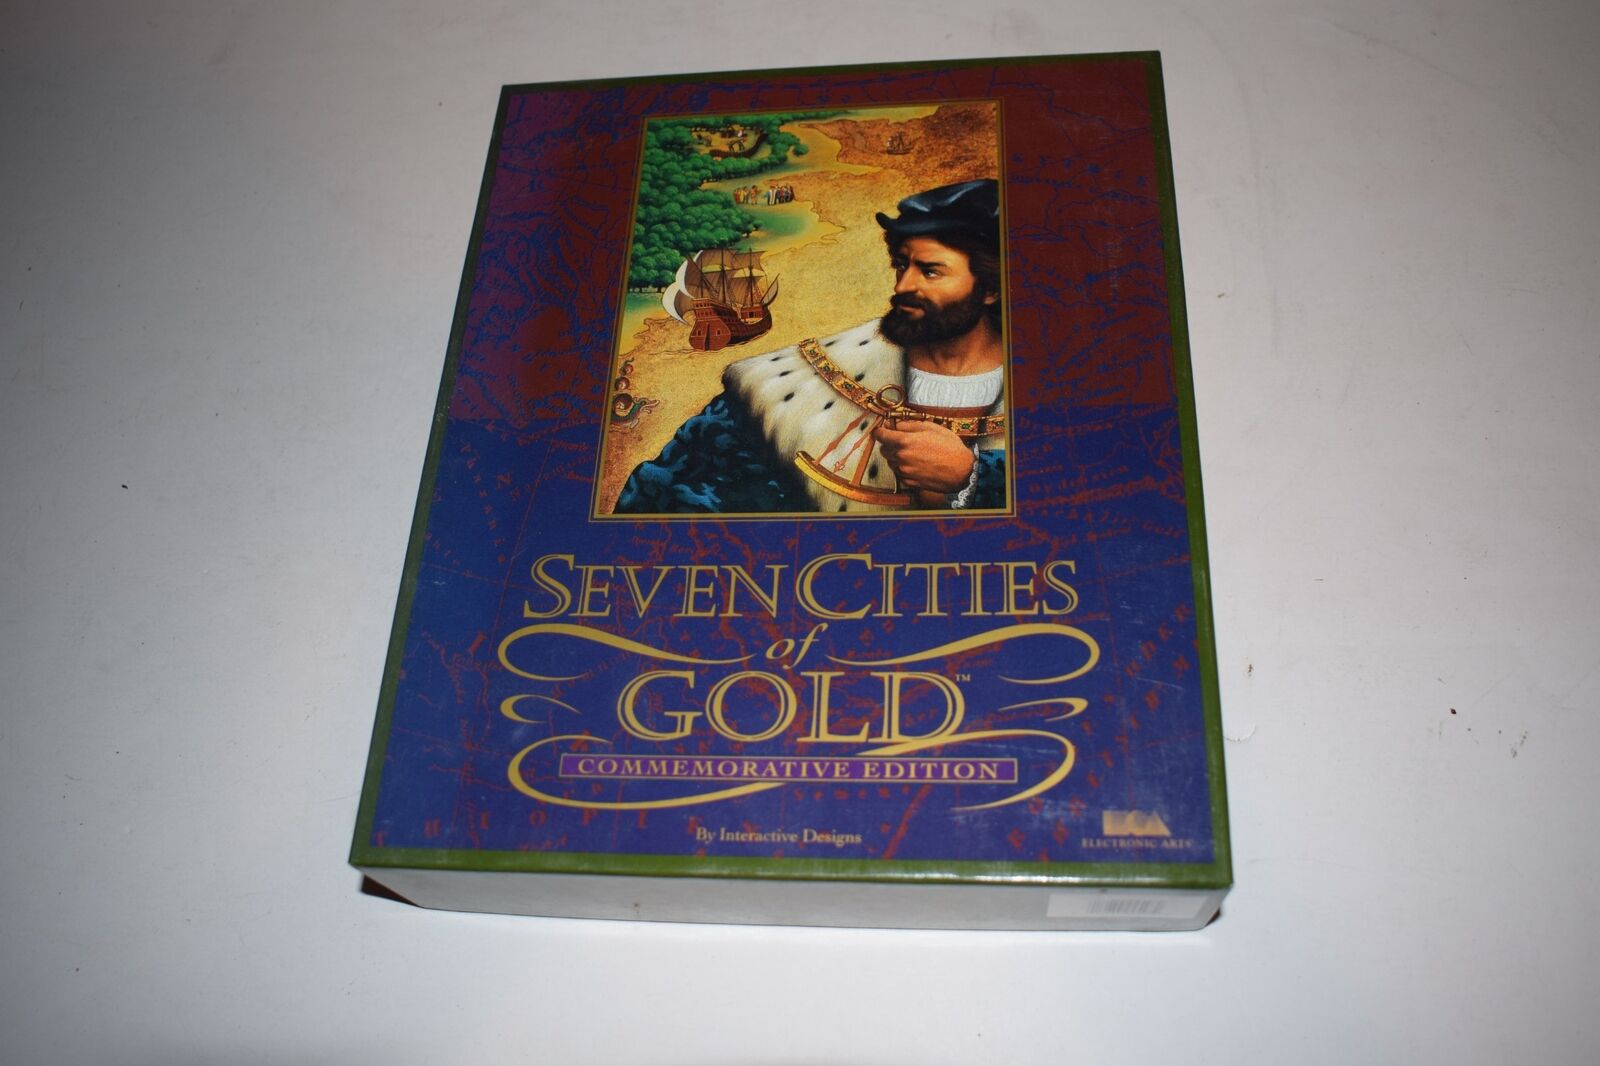 EA Computer Game Seven Cities of Gold (Commemorative Ed) VINTAGE PC   (HDN42)